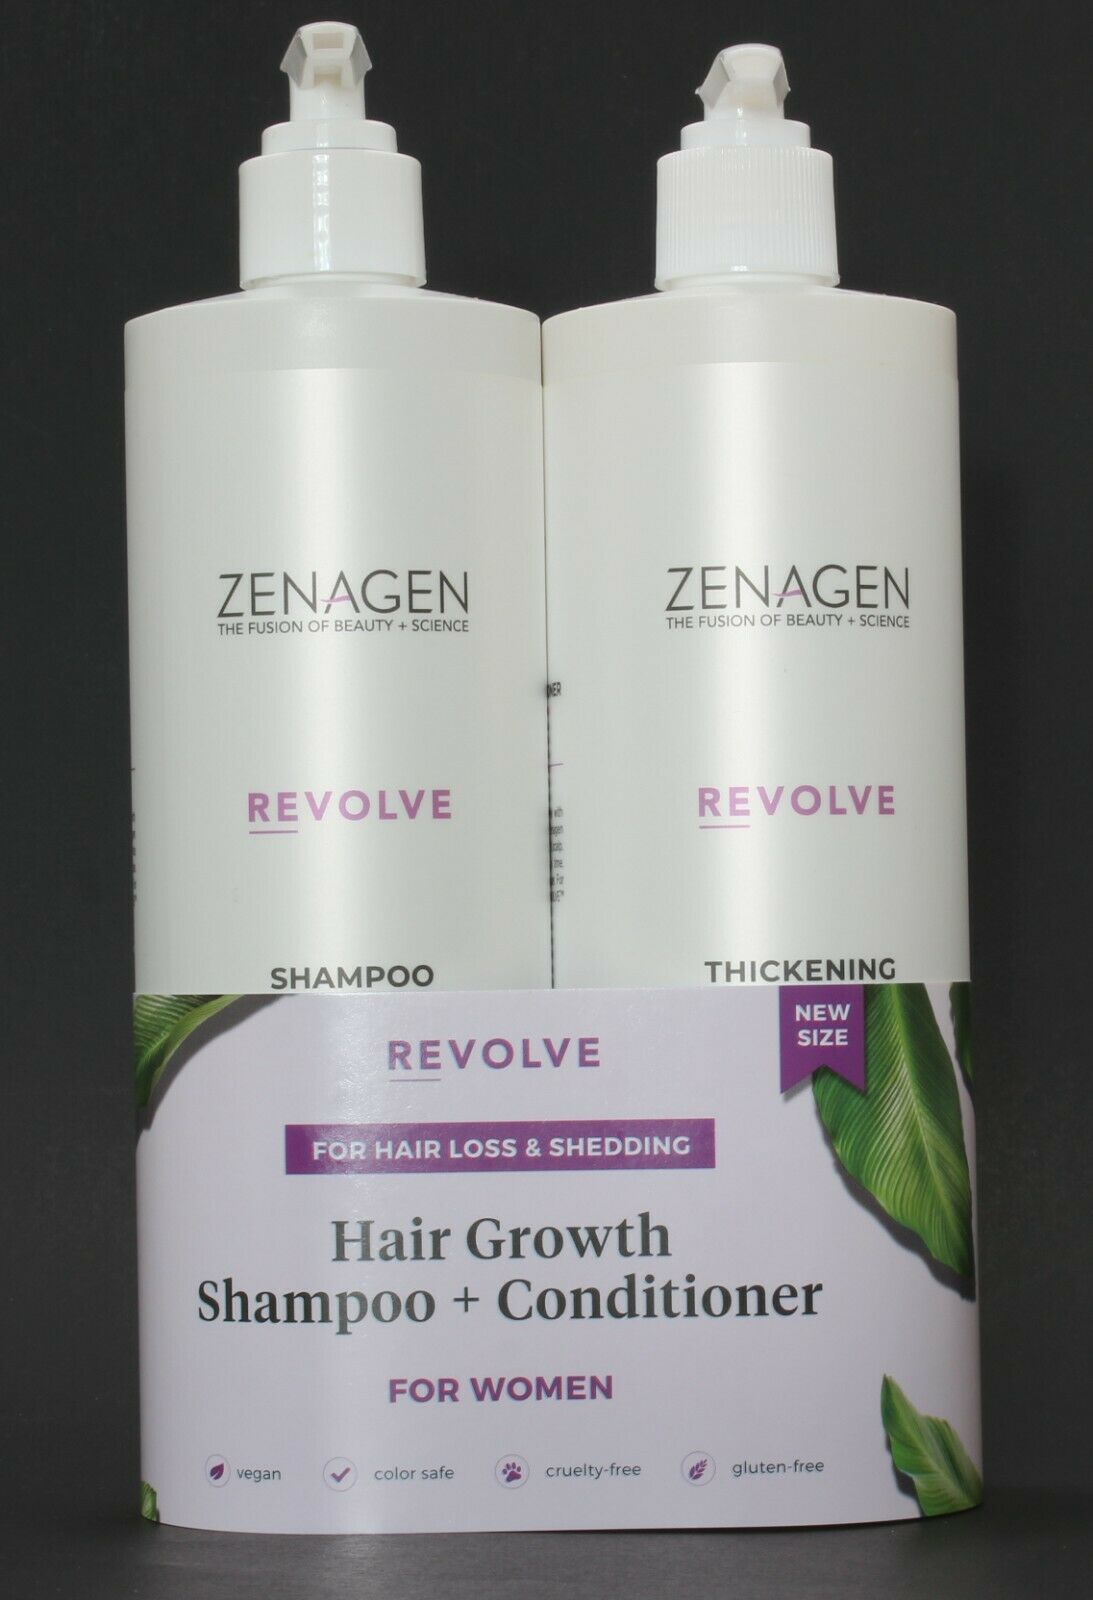 Zenagen Revolve Hair Growth Shampoo and Conditioner For Women 16 oz DUO